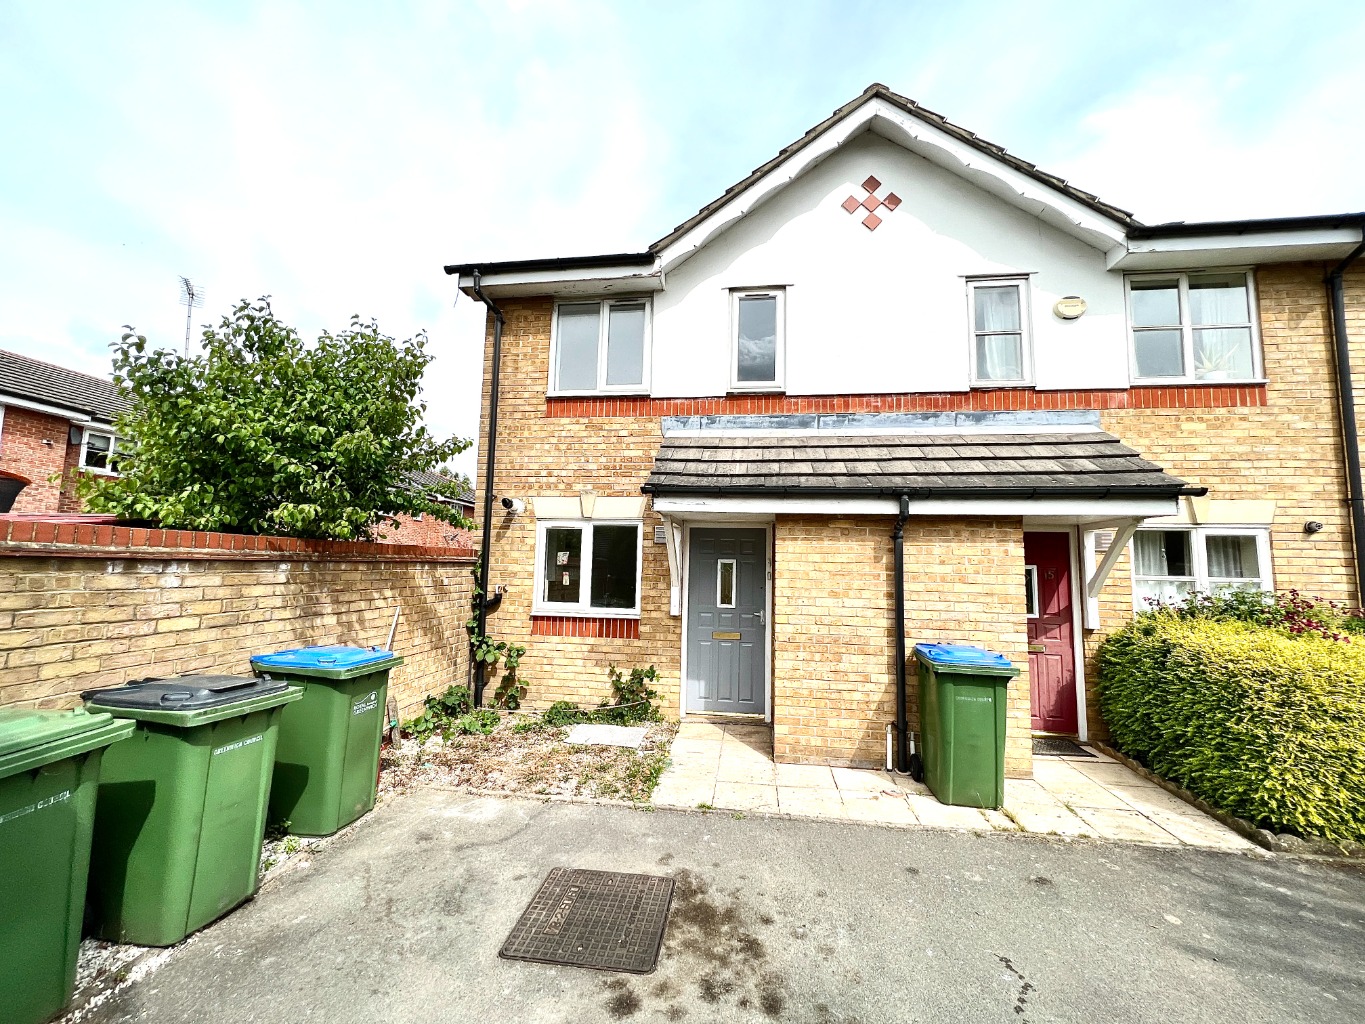 Beaumont Gibbs are delighted to offer this lovely two bedroomed end of terrace house for sale in central Thamesmead. The property is offered in excellent decorative order throughout, having been freshly repainted throughout and had new carpets and vinyl flooring fitted throughout.